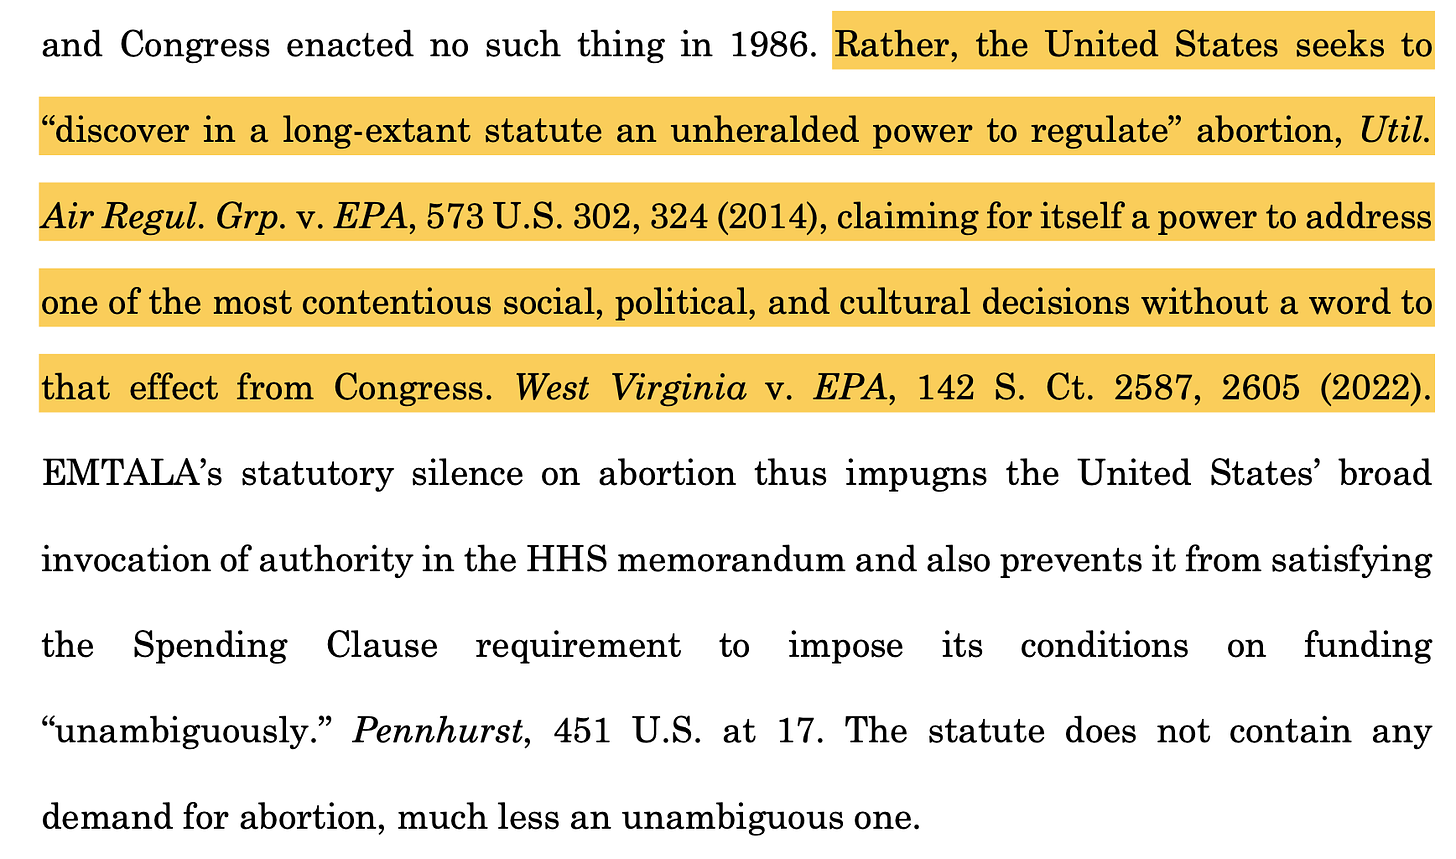 Rather, the United States seeks to “discover in a long-extant statute an unheralded power to regulate” abortion, Util. Air Regul. Grp. v. EPA, 573 U.S. 302, 324 (2014), claiming for itself a power to address one of the most contentious social, political, and cultural decisions without a word to that effect from Congress. West Virginia v. EPA, 142 S. Ct. 2587, 2605 (2022). EMTALA’s statutory silence on abortion thus impugns the United States’ broad invocation of authority in the HHS memorandum and also prevents it from satisfying the Spending Clause requirement to impose its conditions on funding “unambiguously.” Pennhurst, 451 U.S. at 17. The statute does not contain any demand for abortion, much less an unambiguous one.